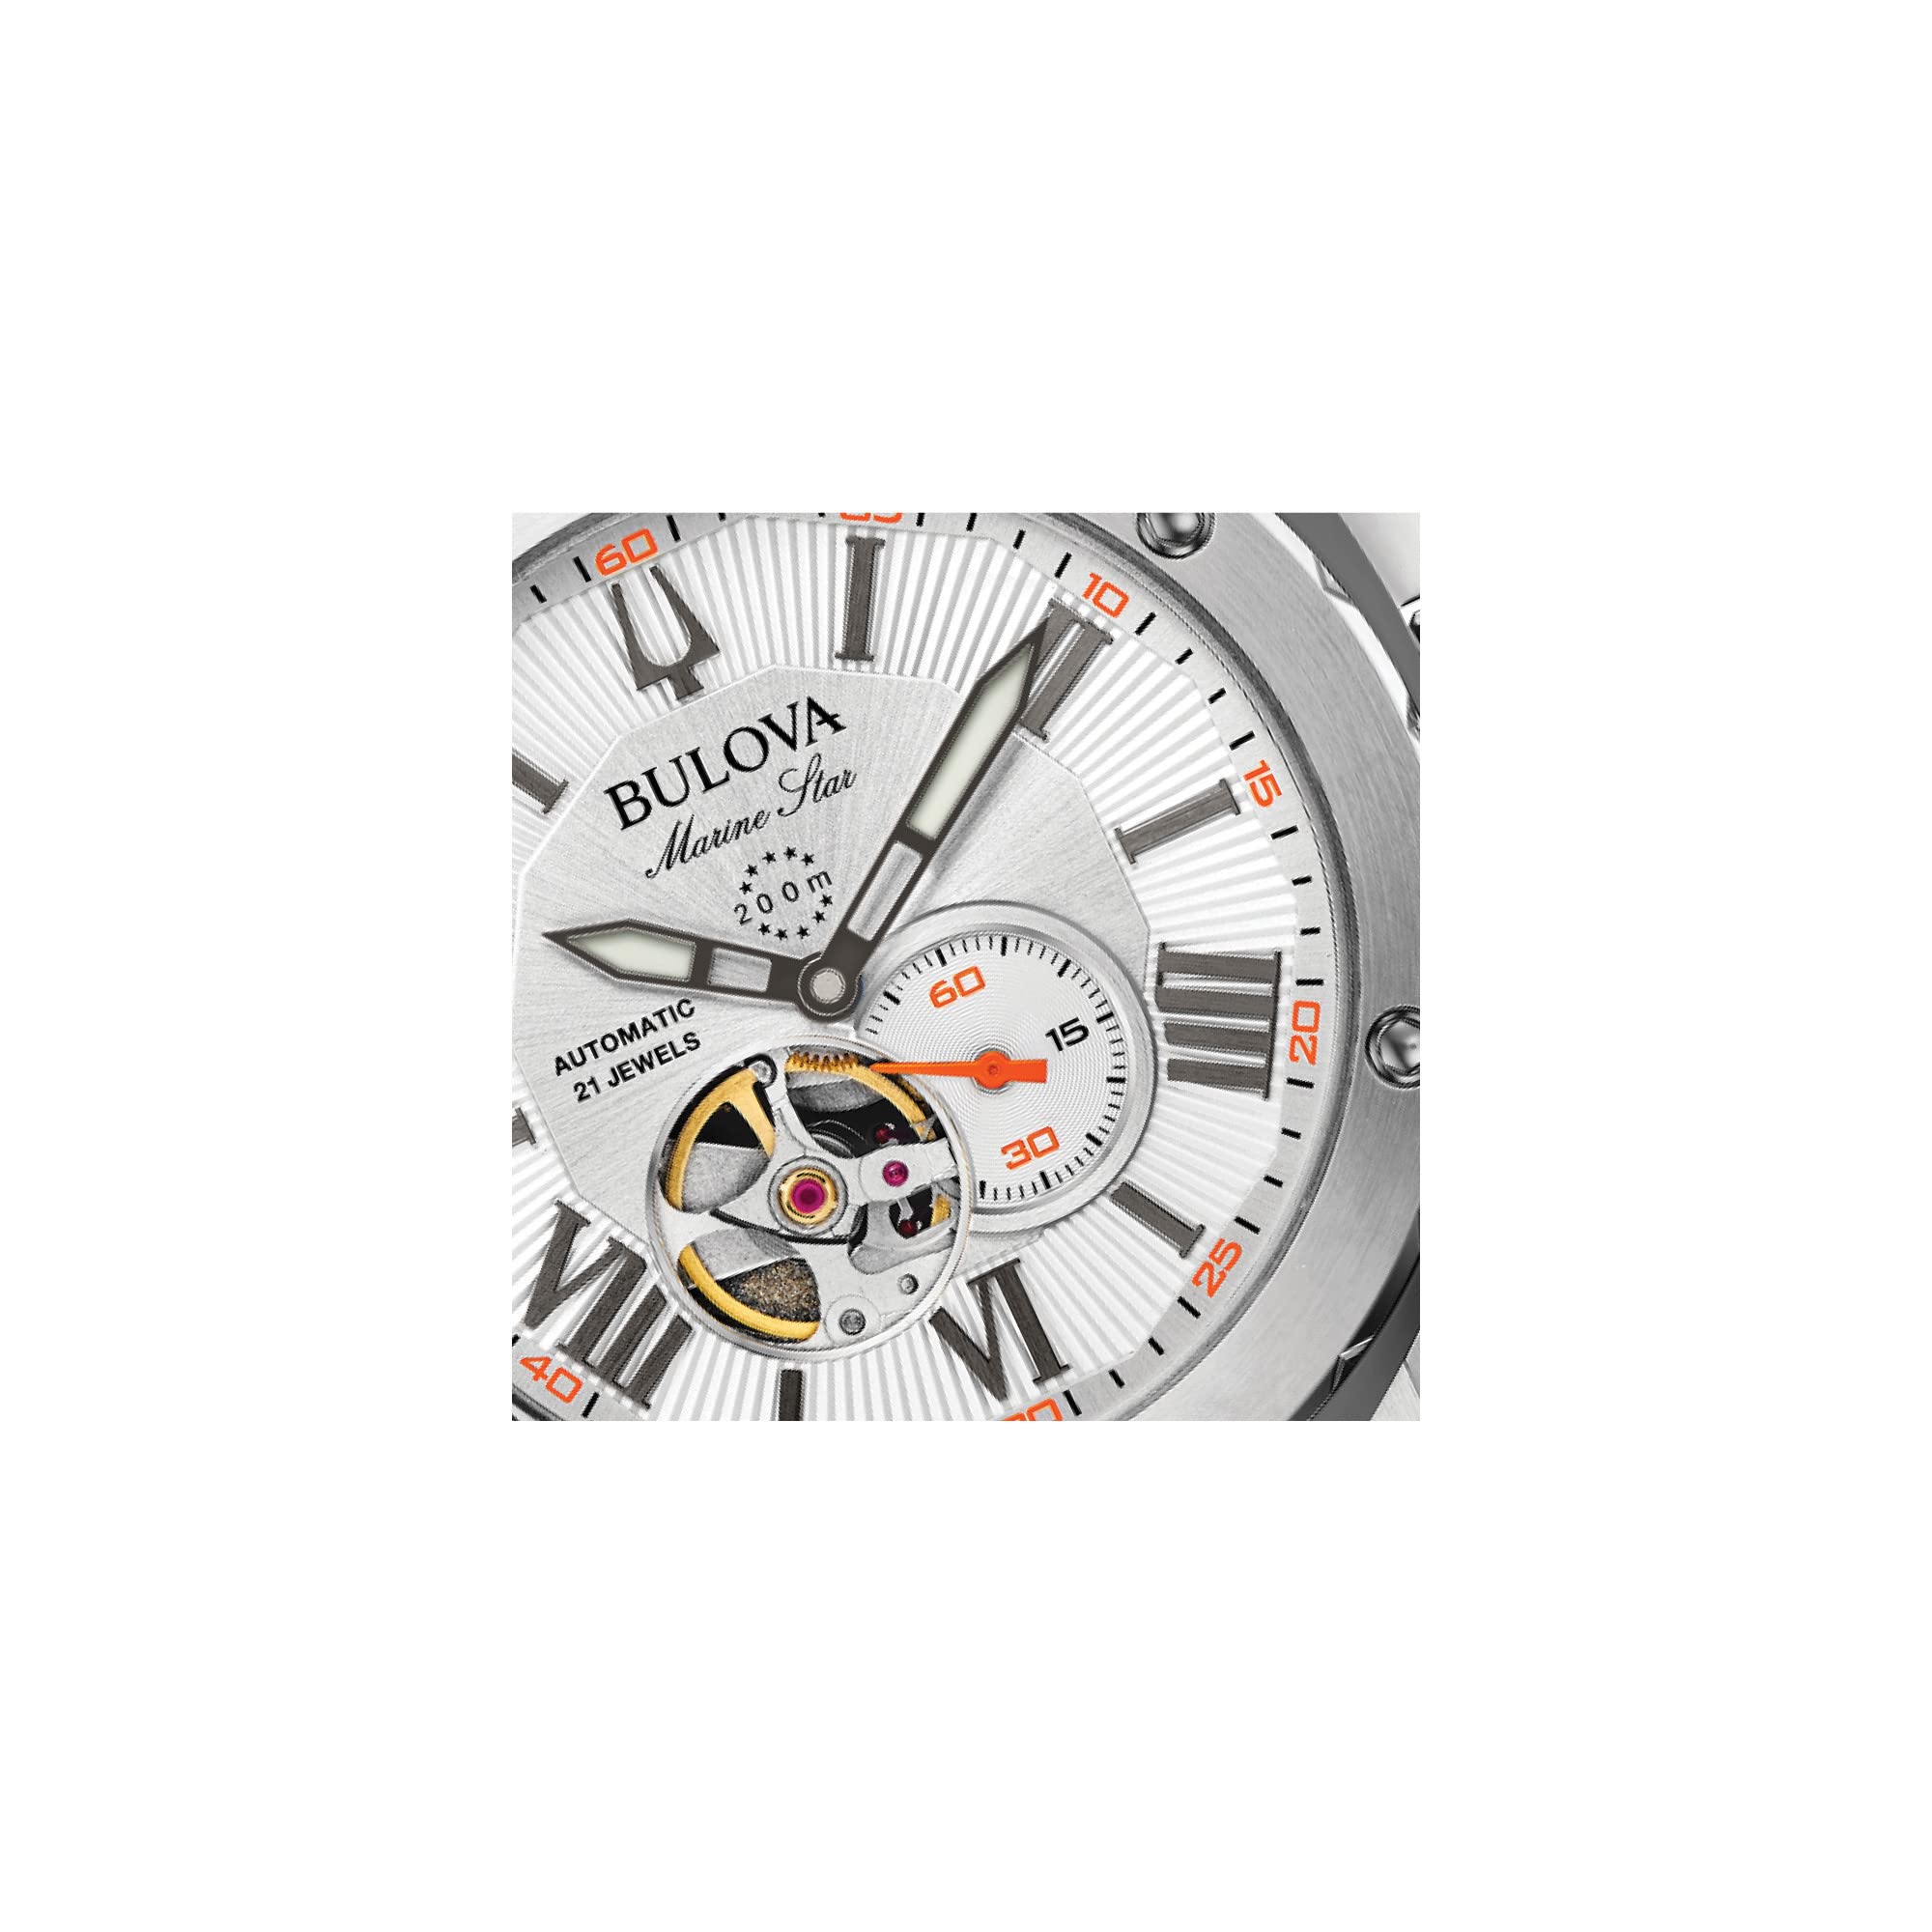 Bulova Men's Marine Star 'Series A' Automatic Watch with Orange Silicone Strap Style: 98A226